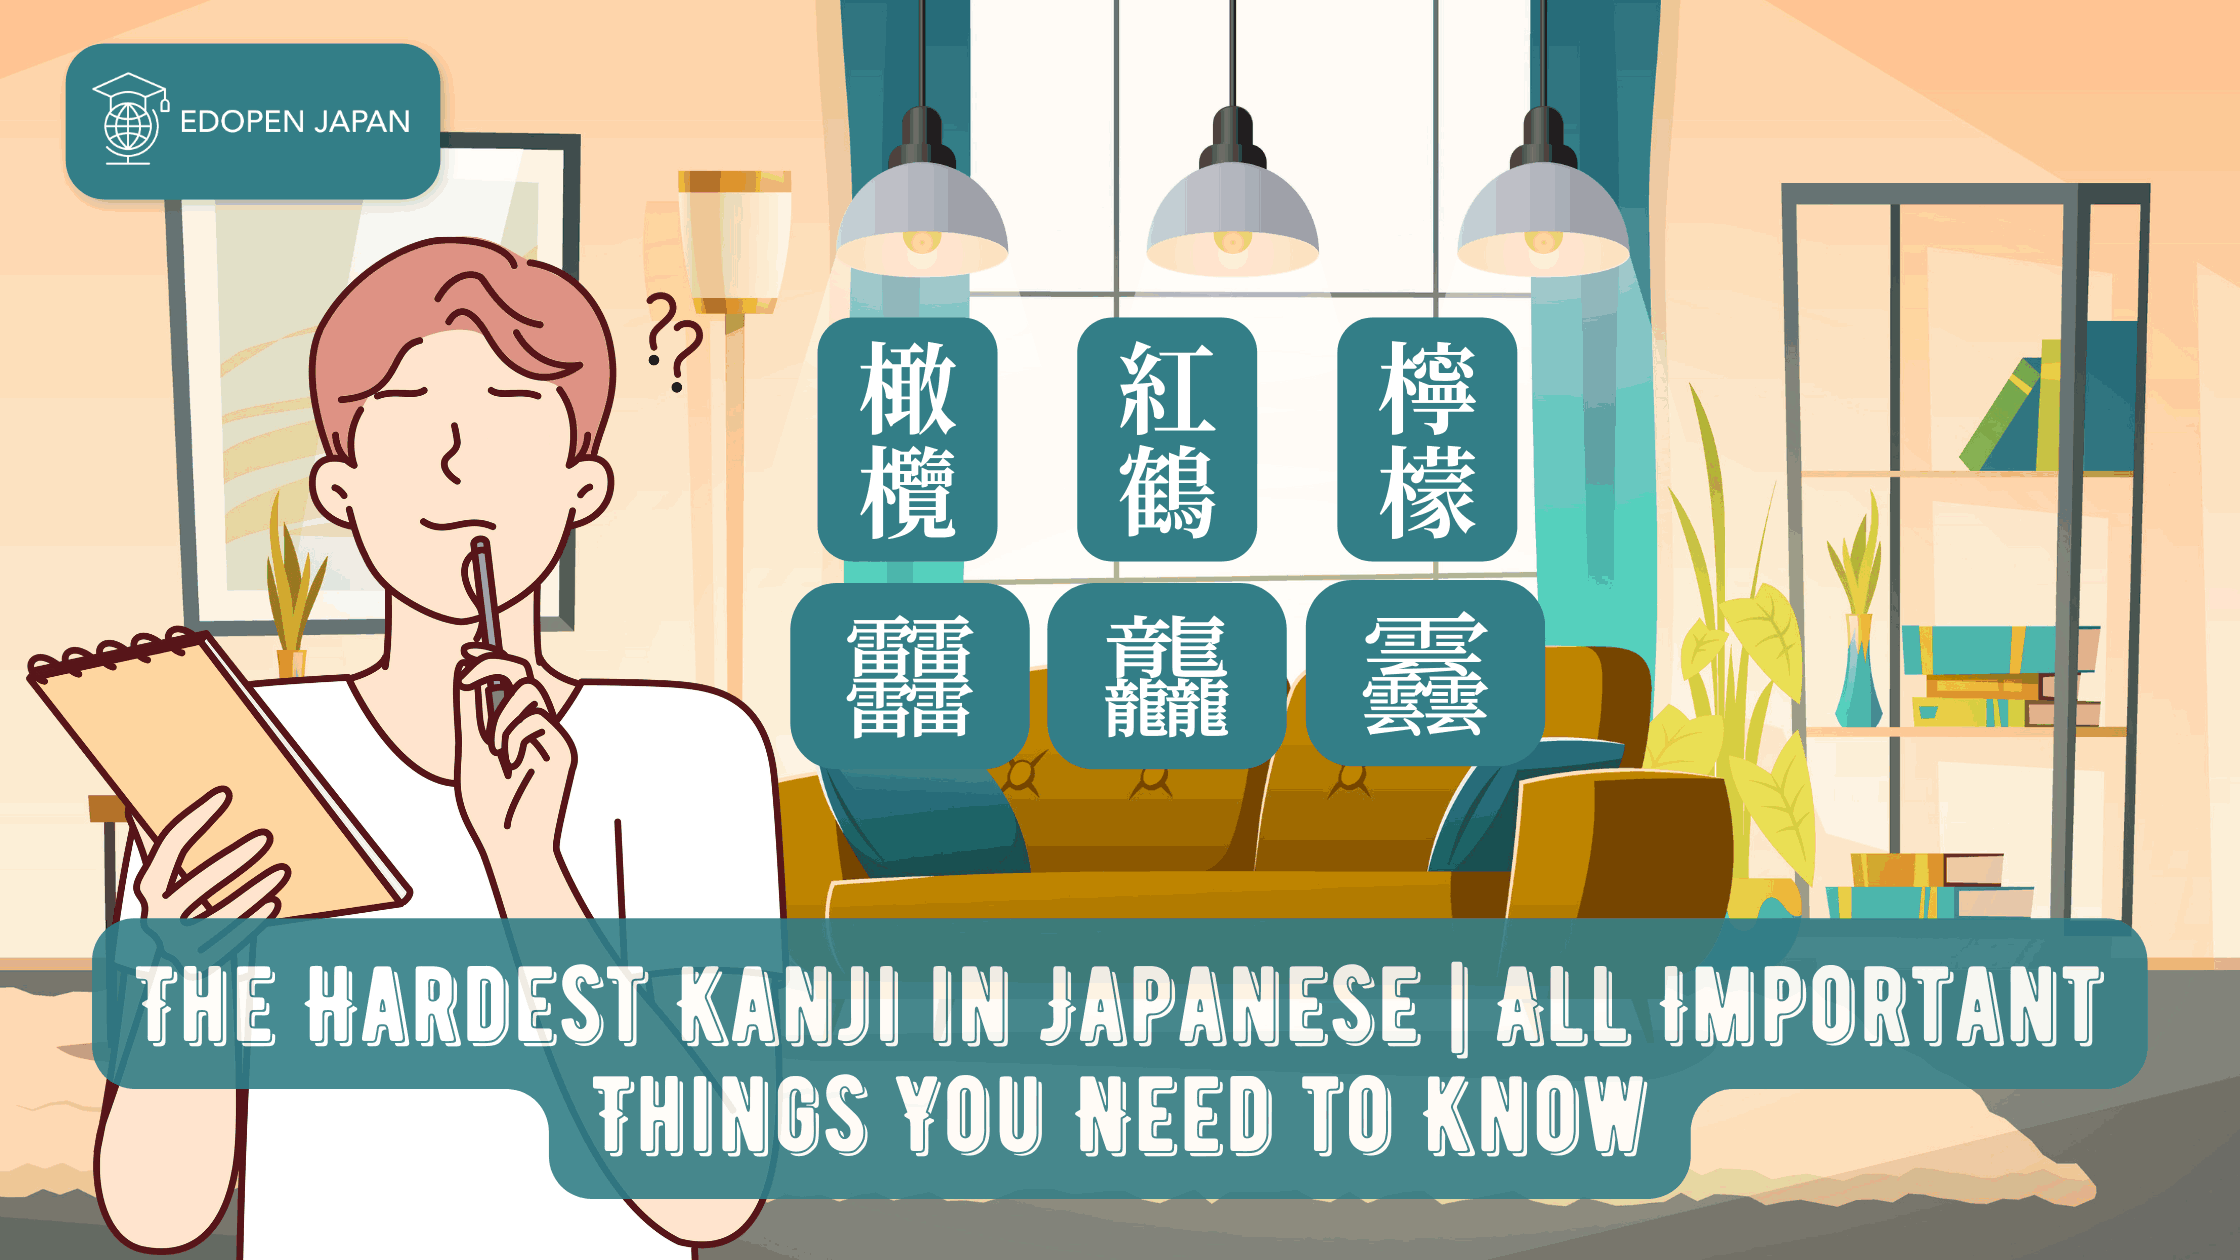 The Hardest Kanji in Japanese | All Important Things You Need to Know - EDOPEN Japan